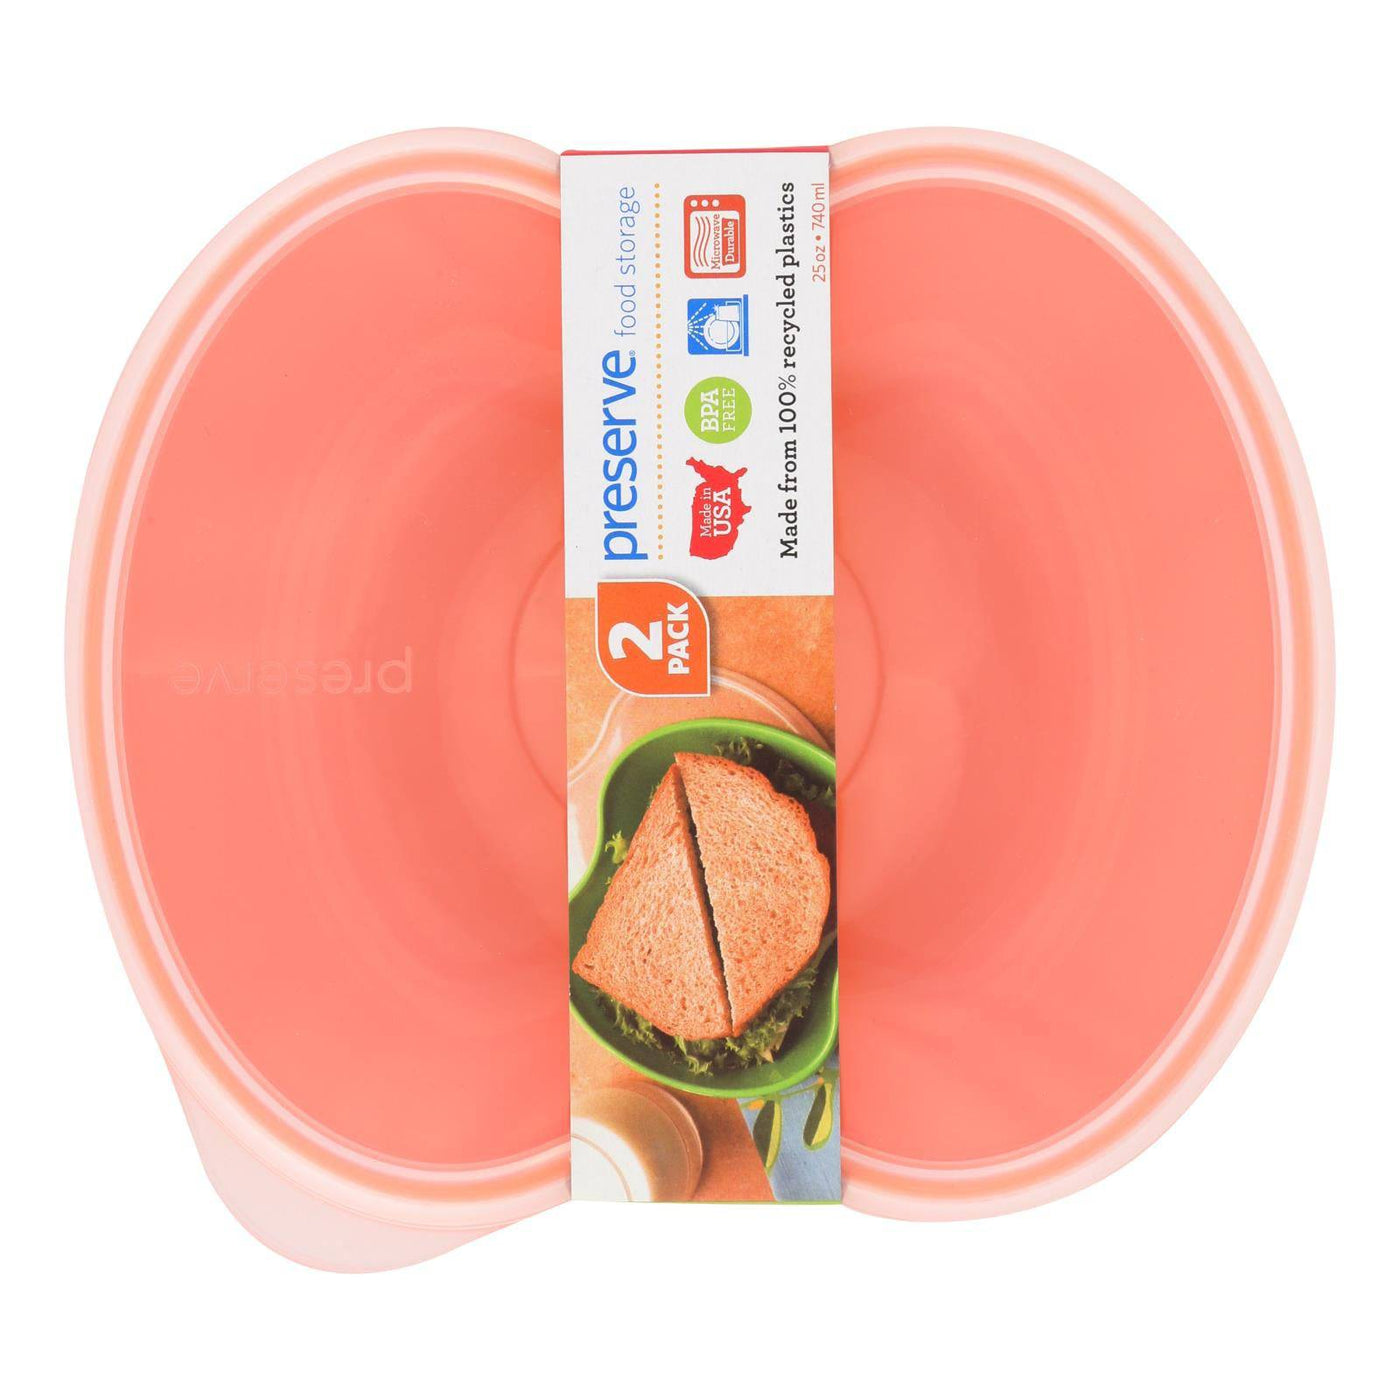 Preserve Small Square Food Storage Container - Orange- 2 Pack | OnlyNaturals.us